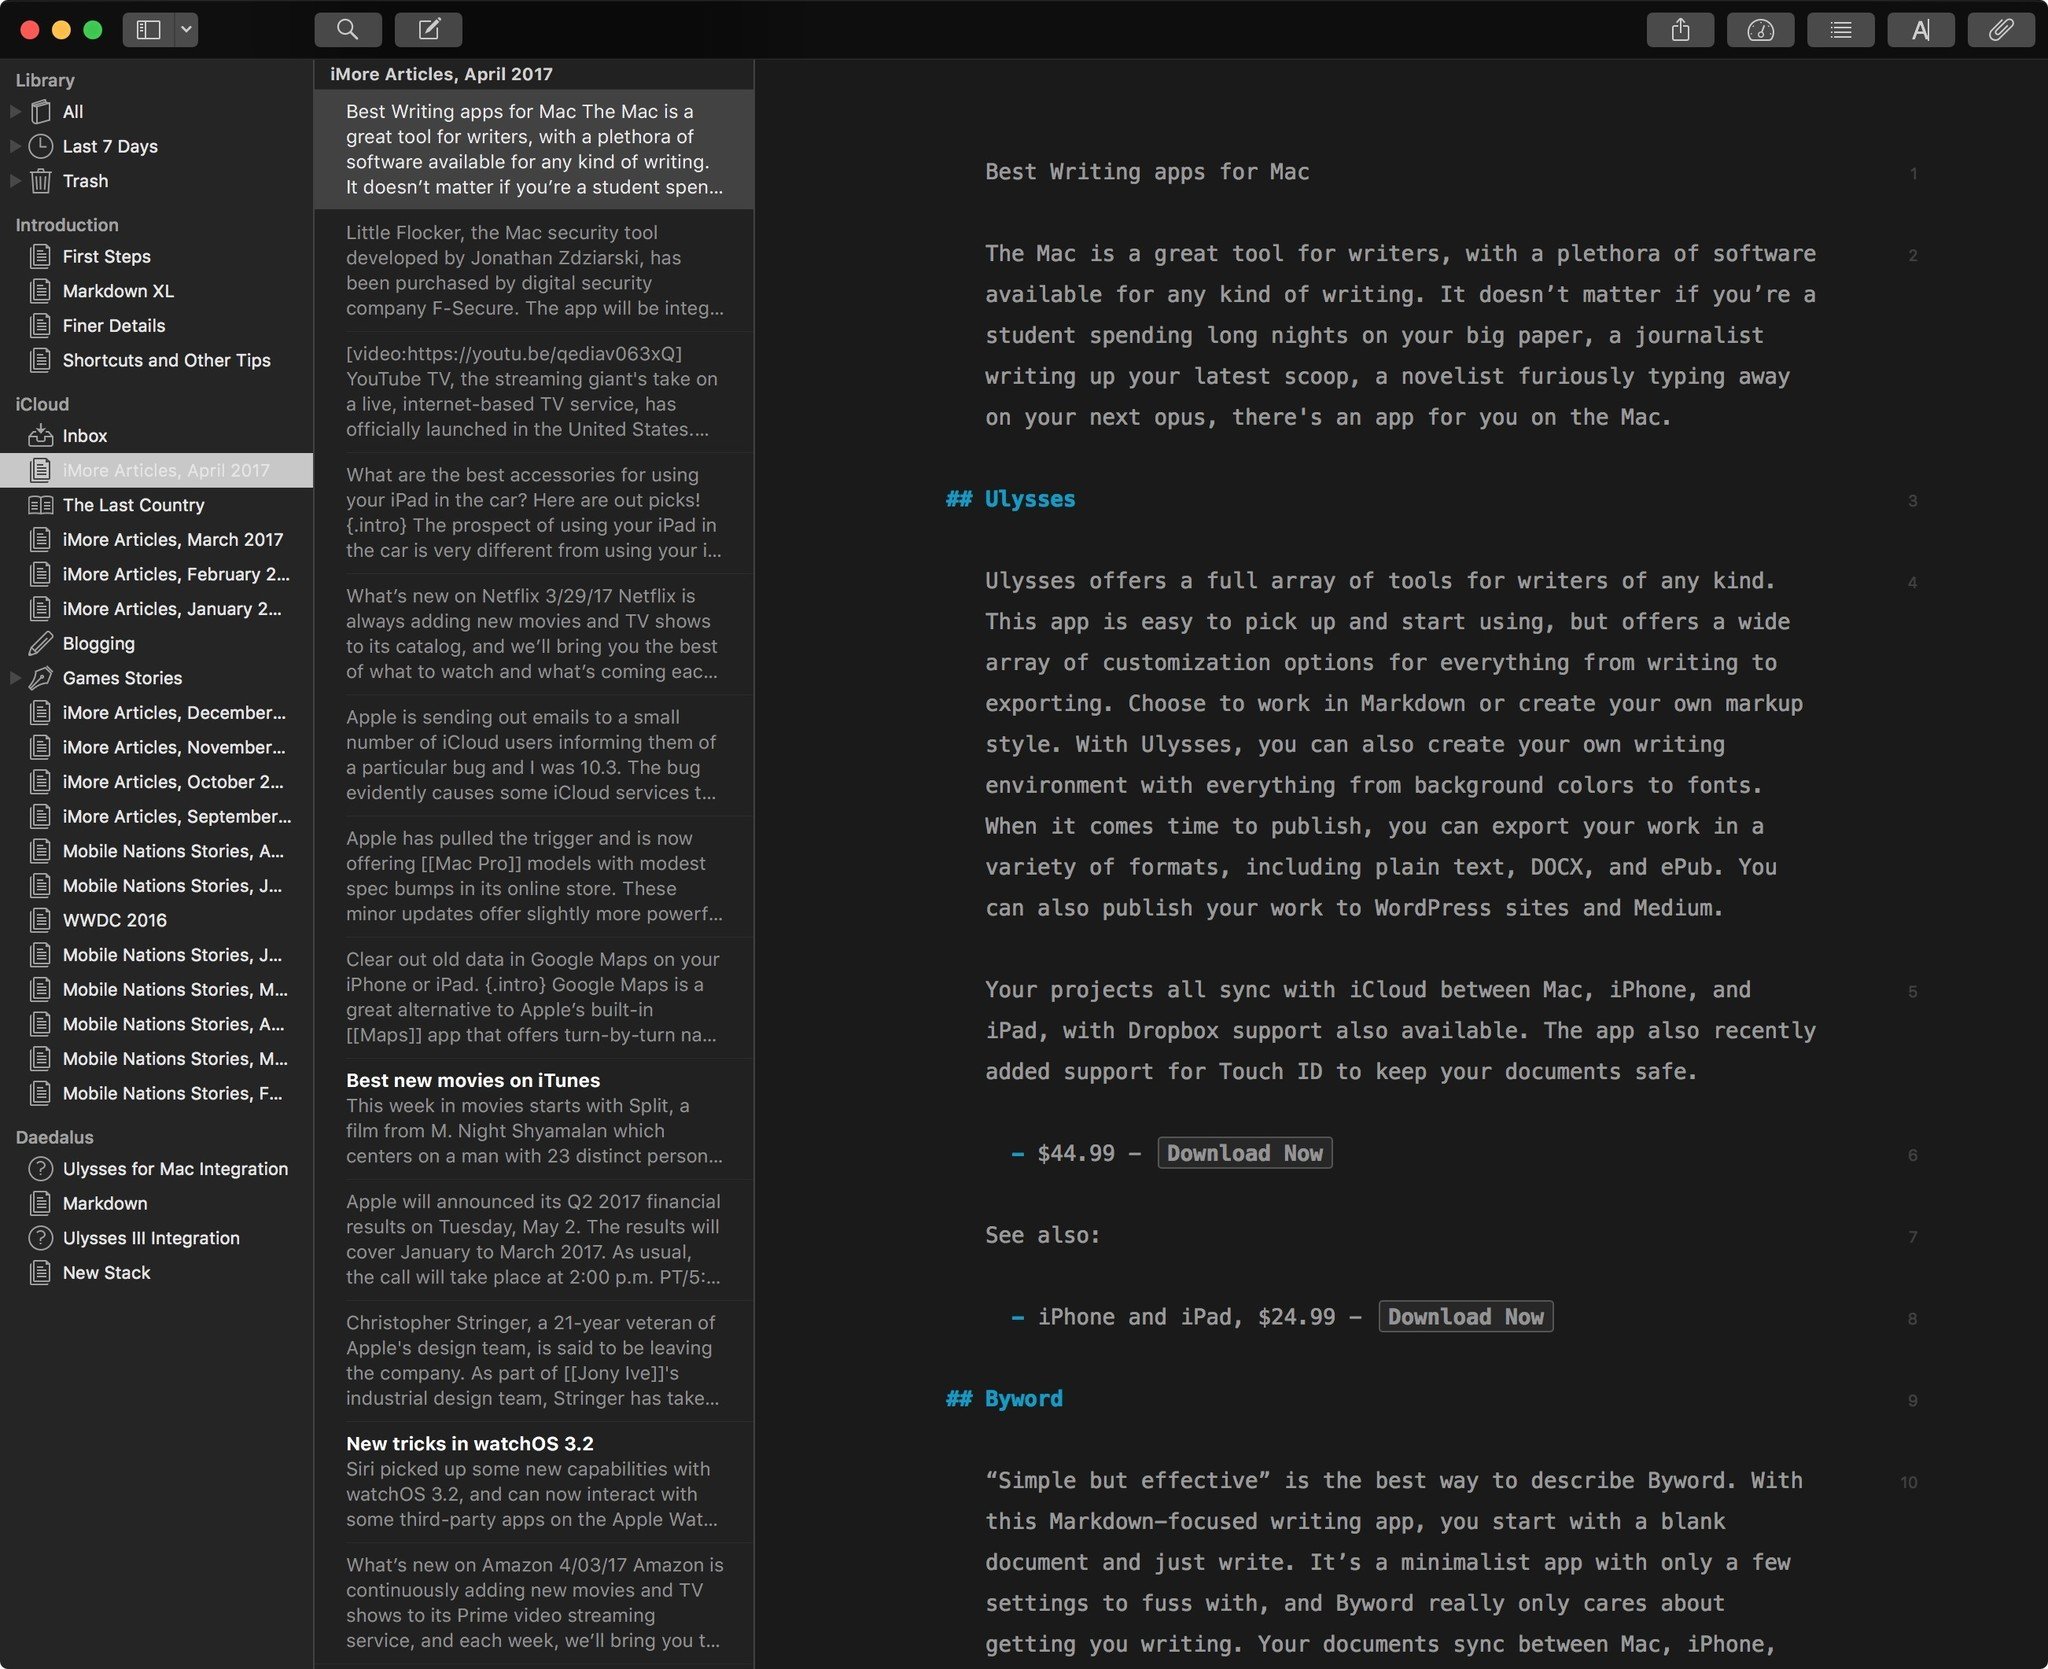 The Best Pro Writing App for Mac (and iOS)